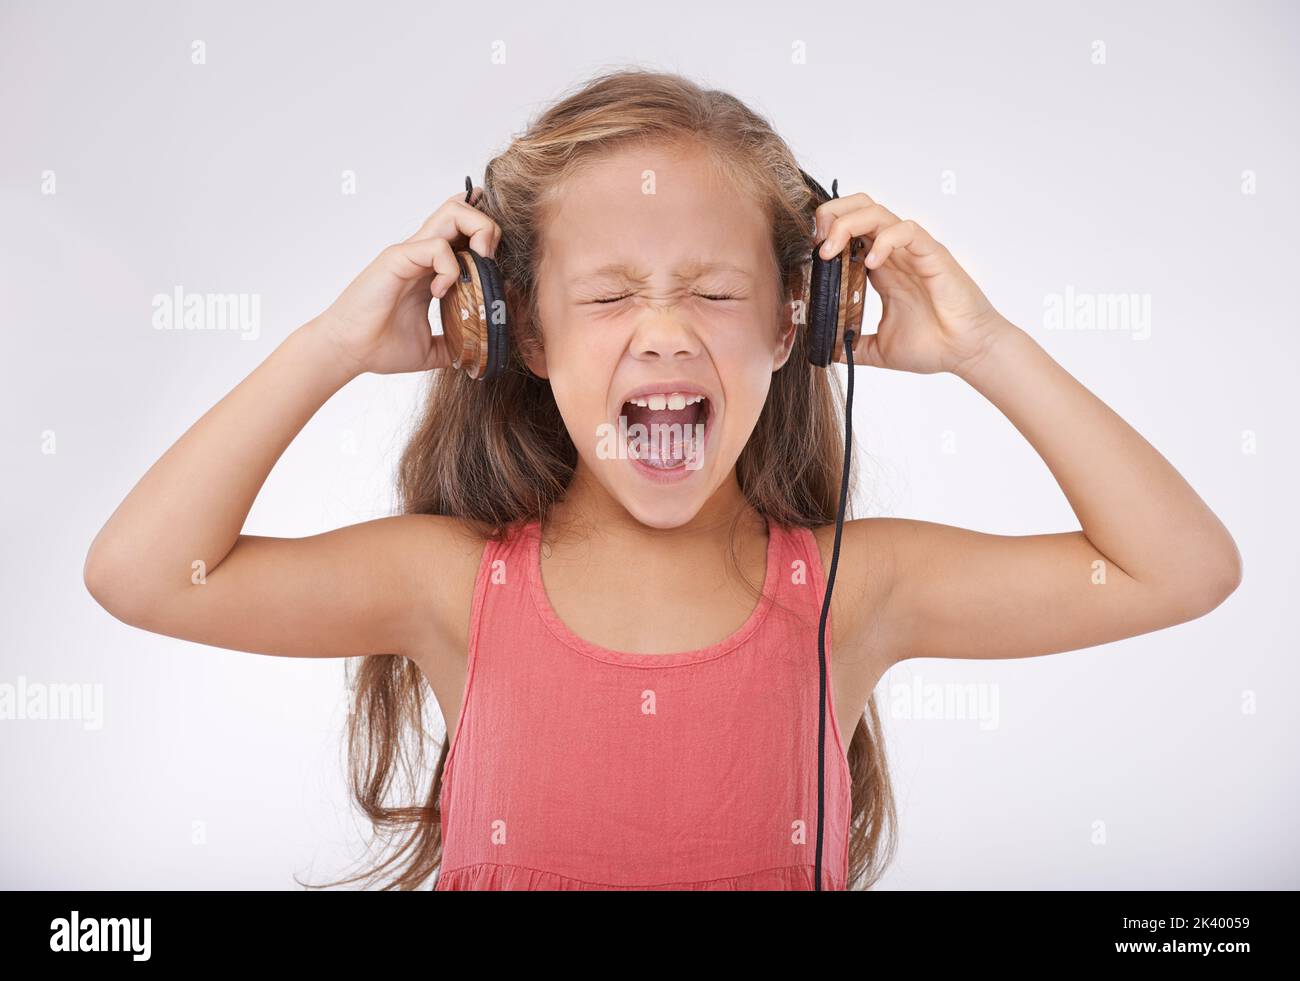 Ouch. A young girl screaming while wearing a pair of headphones. Stock Photo